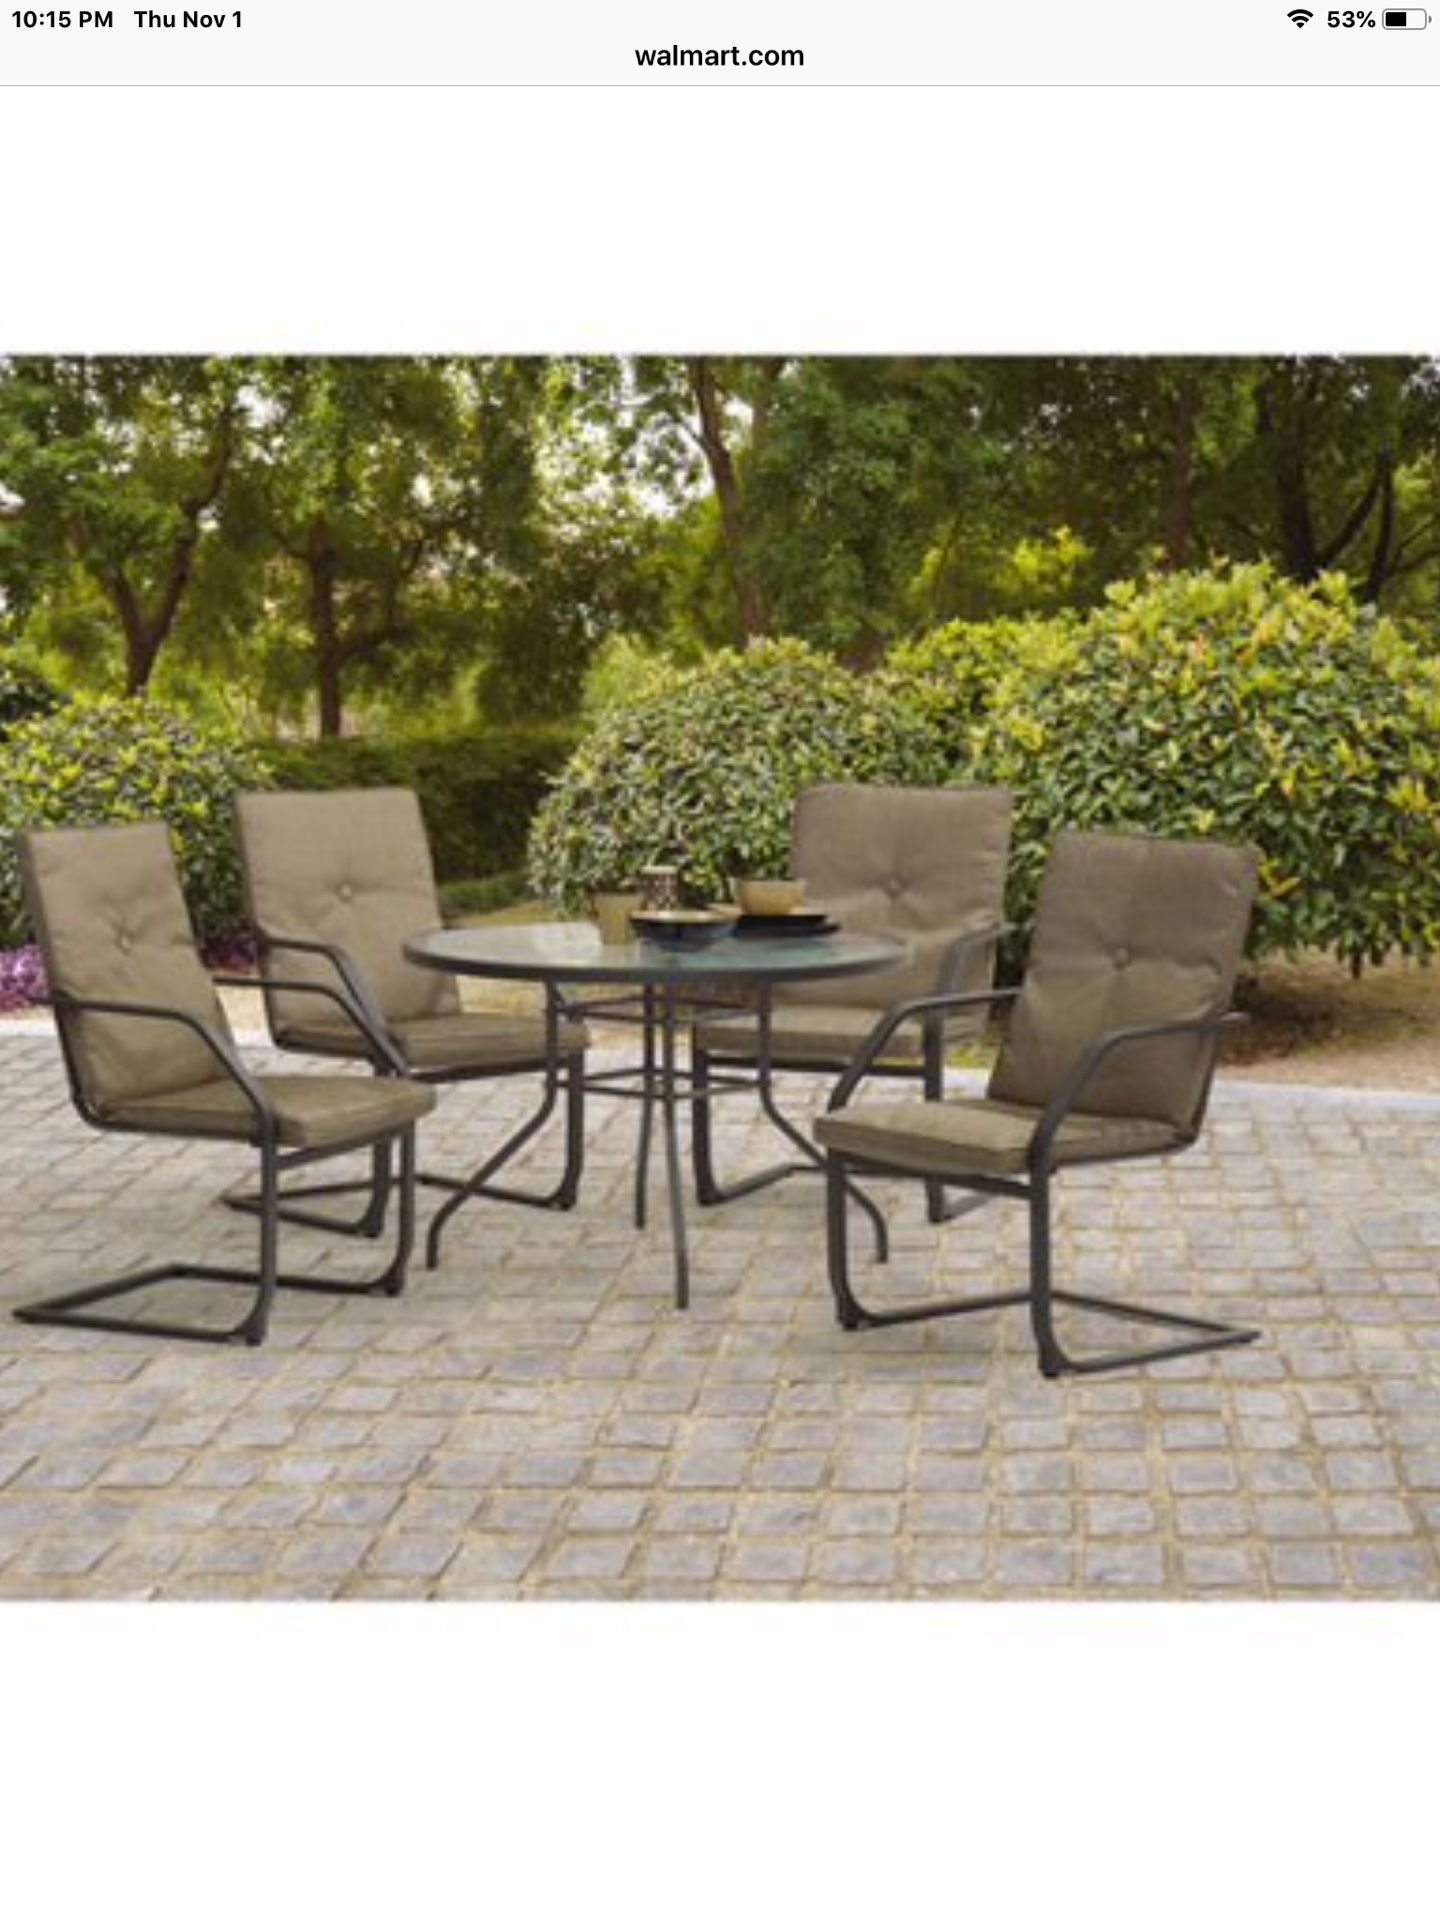 New!! Outdoor Dinning chair, set of 4, patio furniture